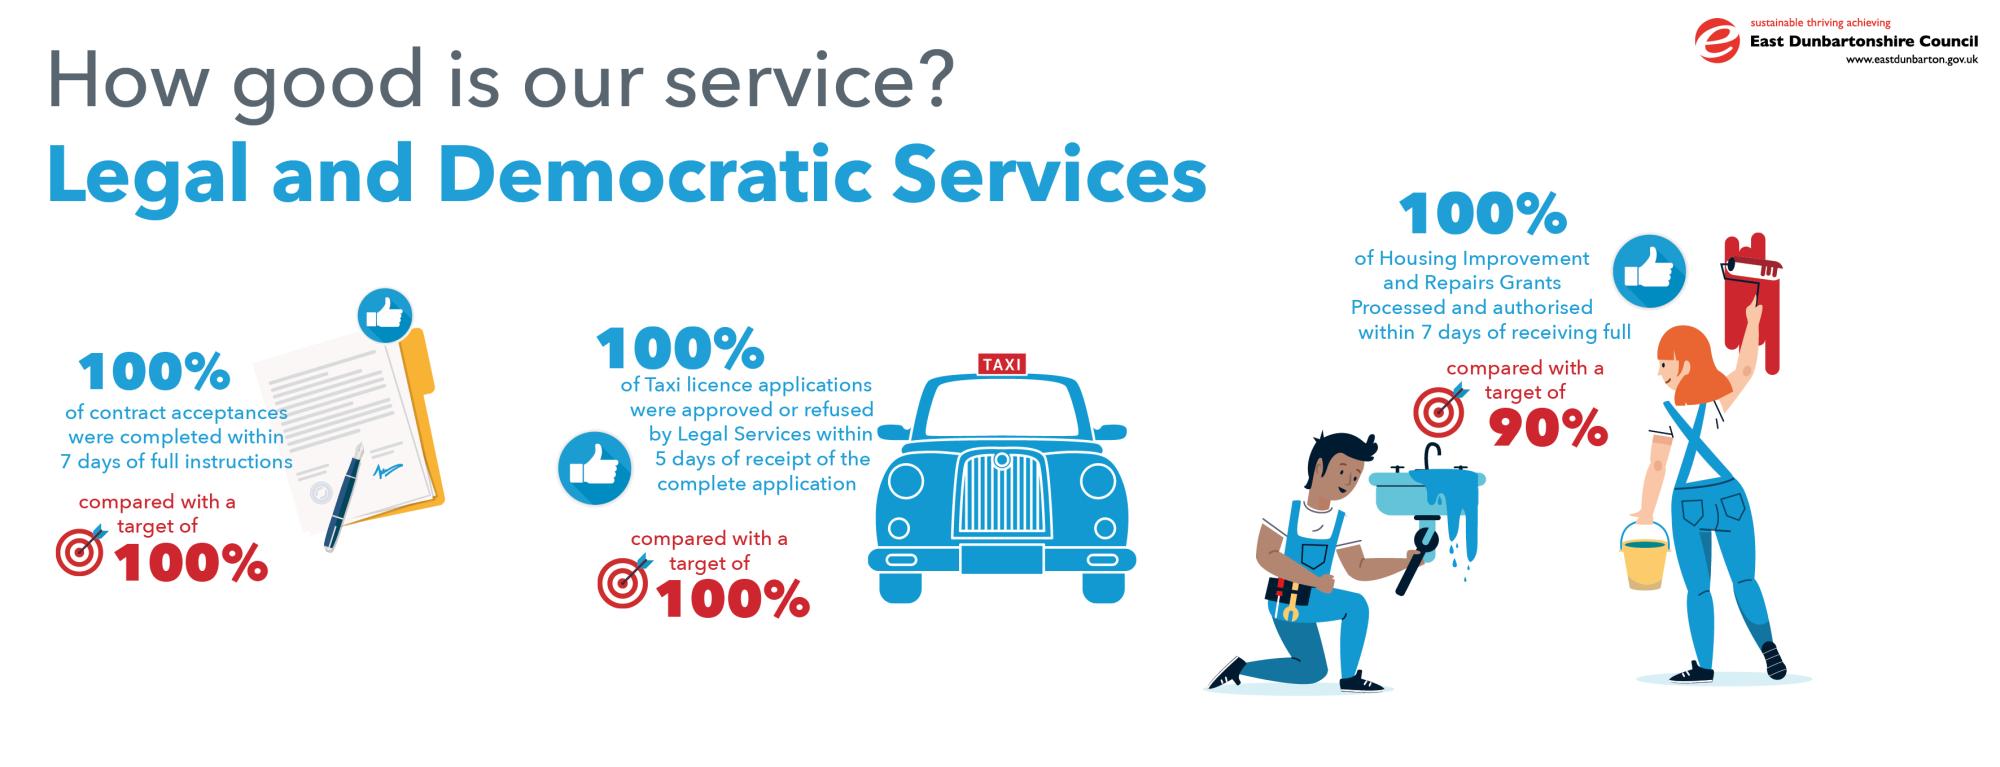 legal and democratic services infographic